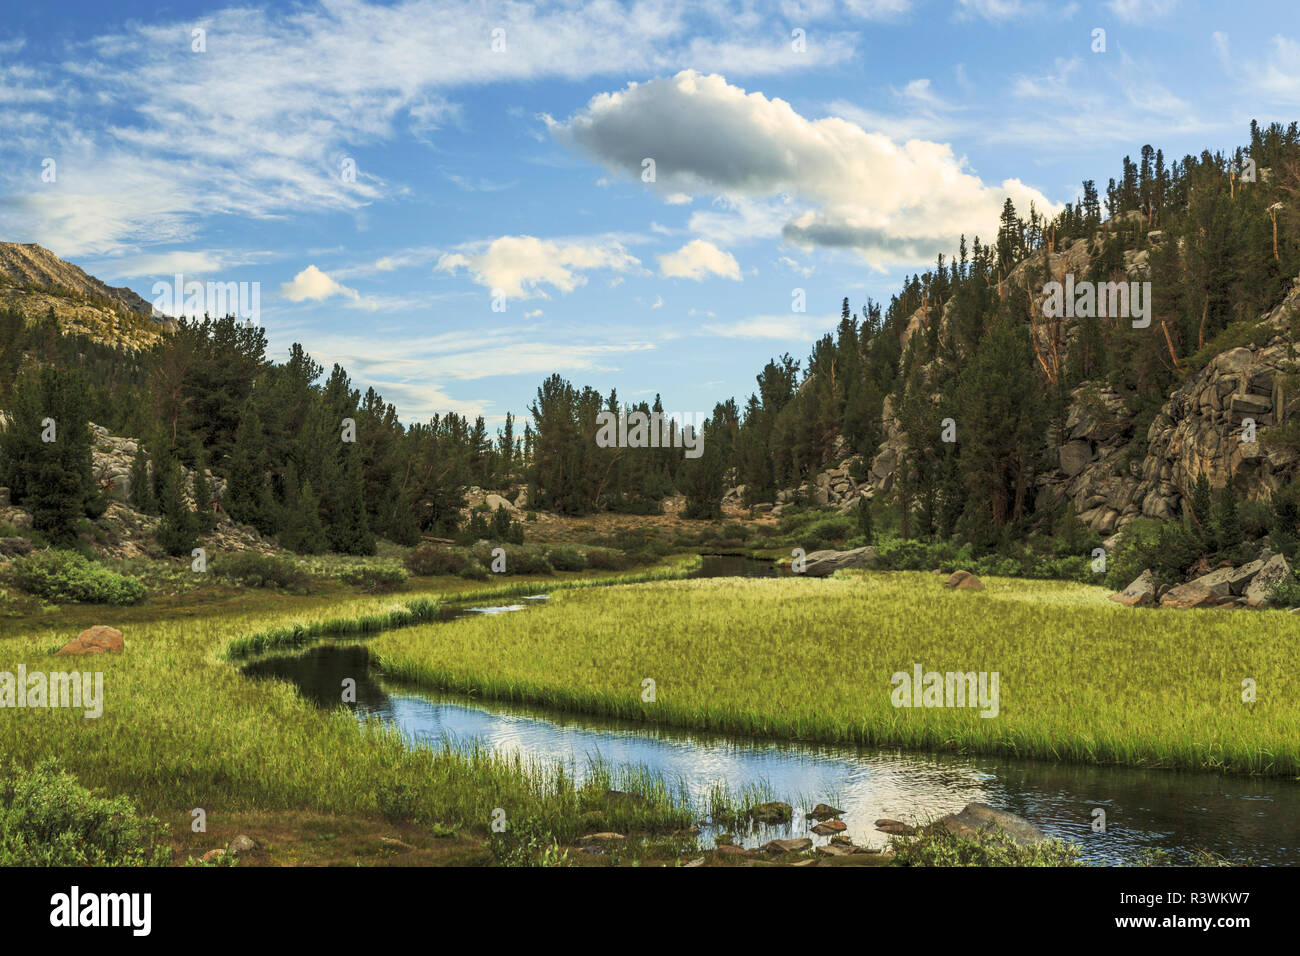 Stream and meadow, Little Lakes Valley, John Muir Wilderness, Inyo National Forest, California. Stock Photo